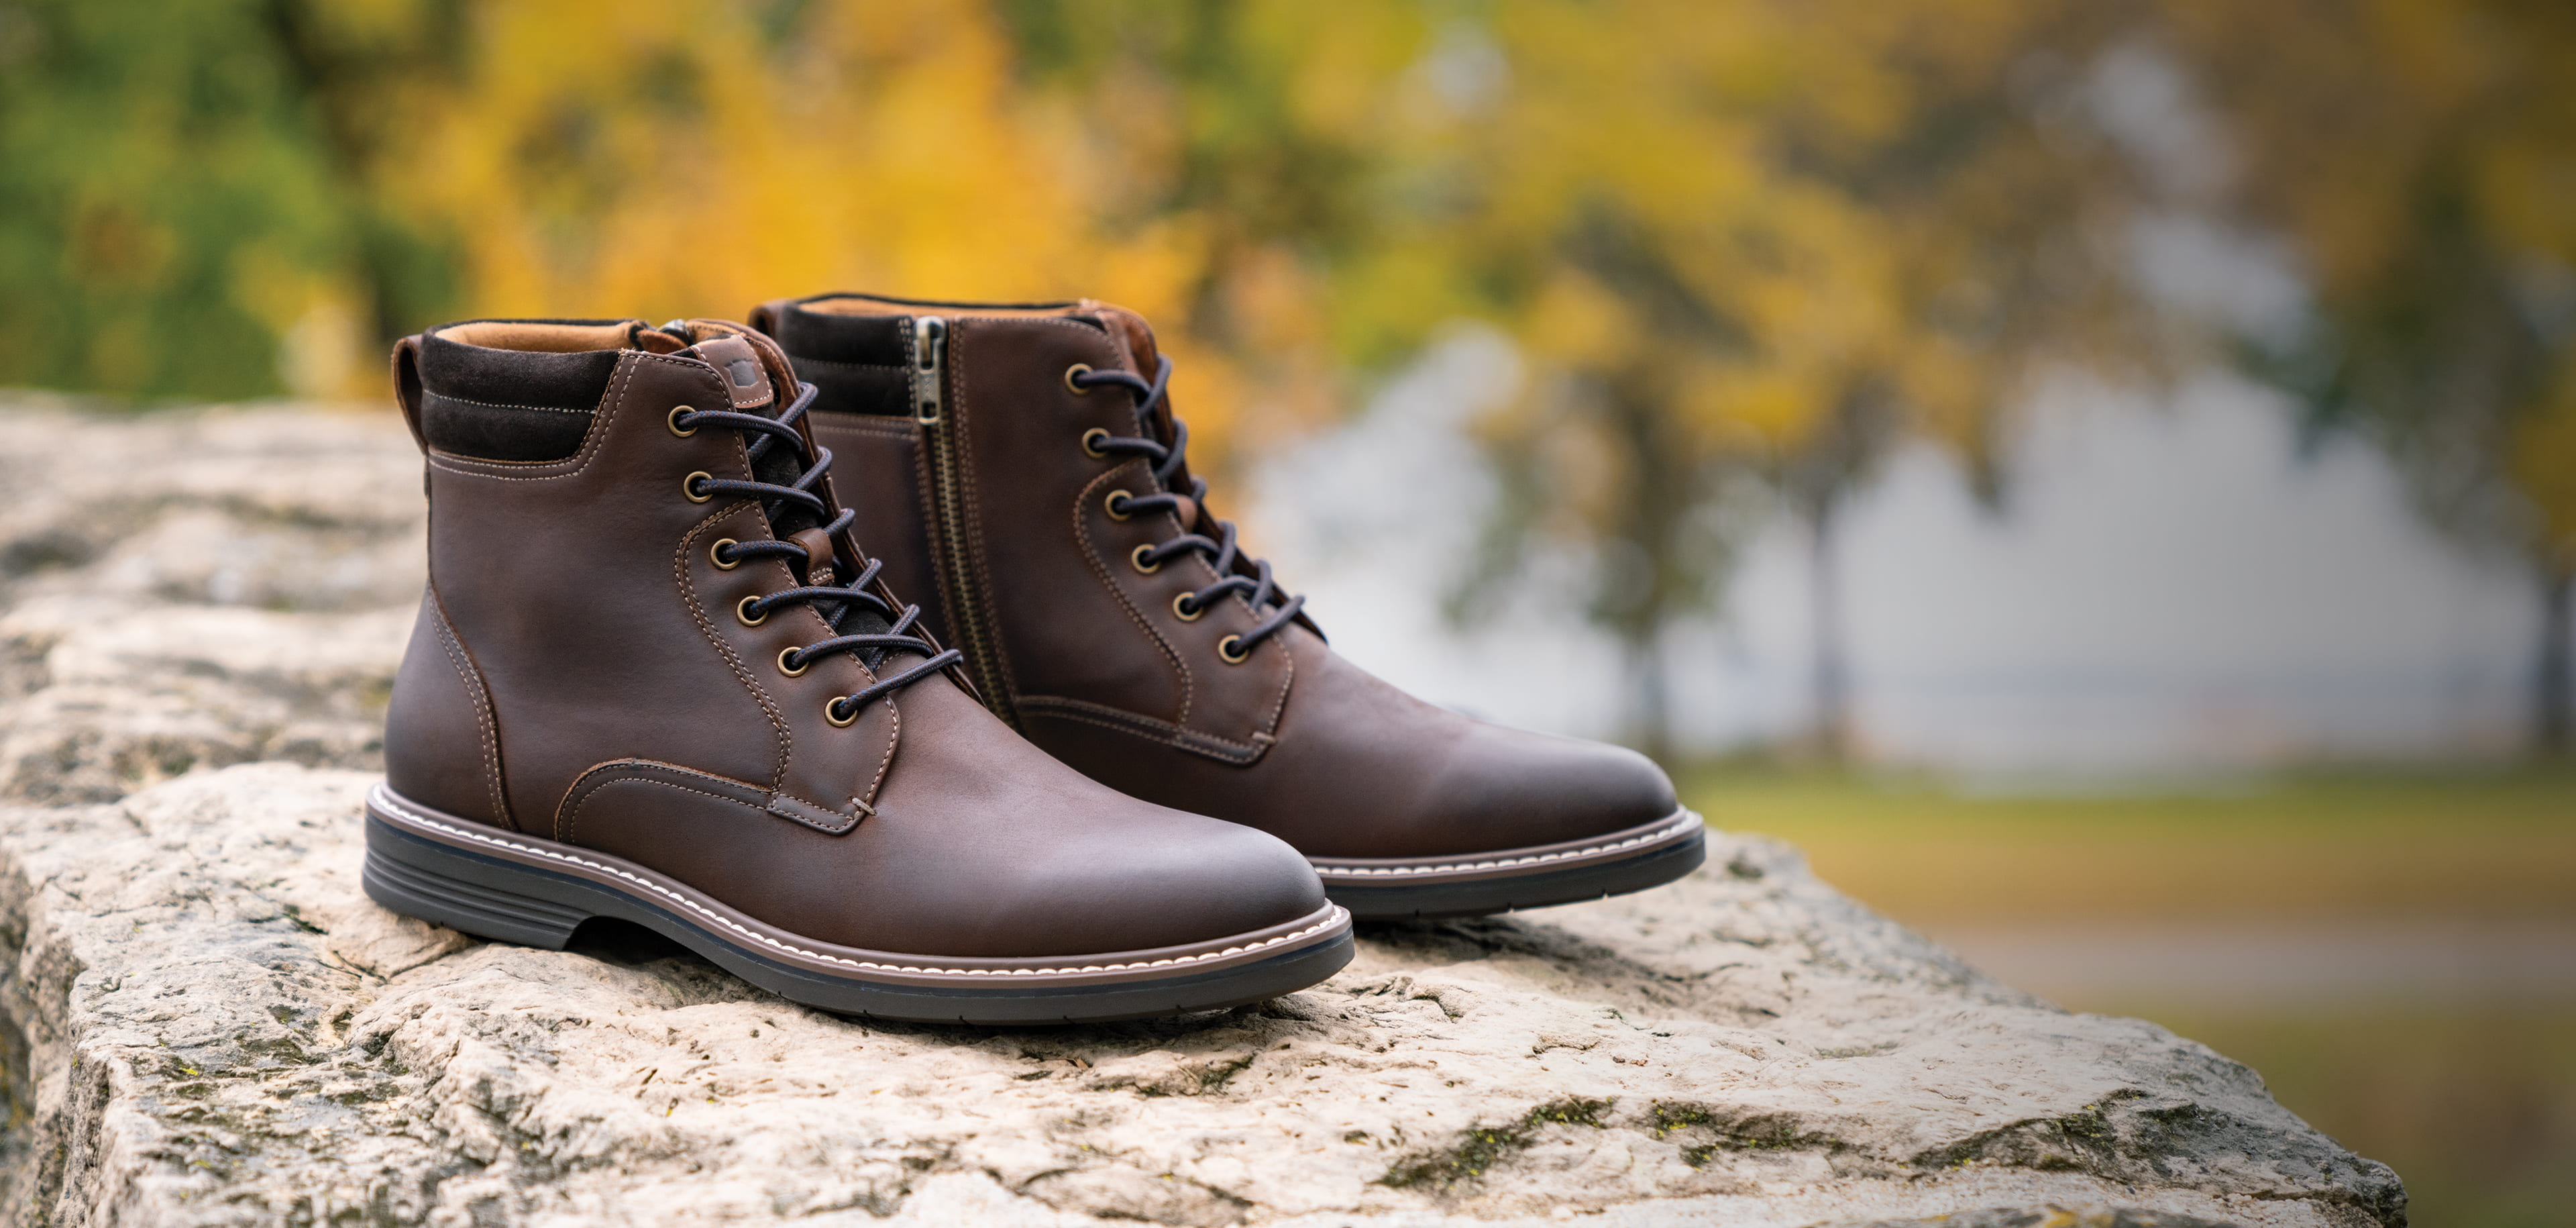 Click to shop Florsheim new arriavals. Image features the Norwalk boot in brown.